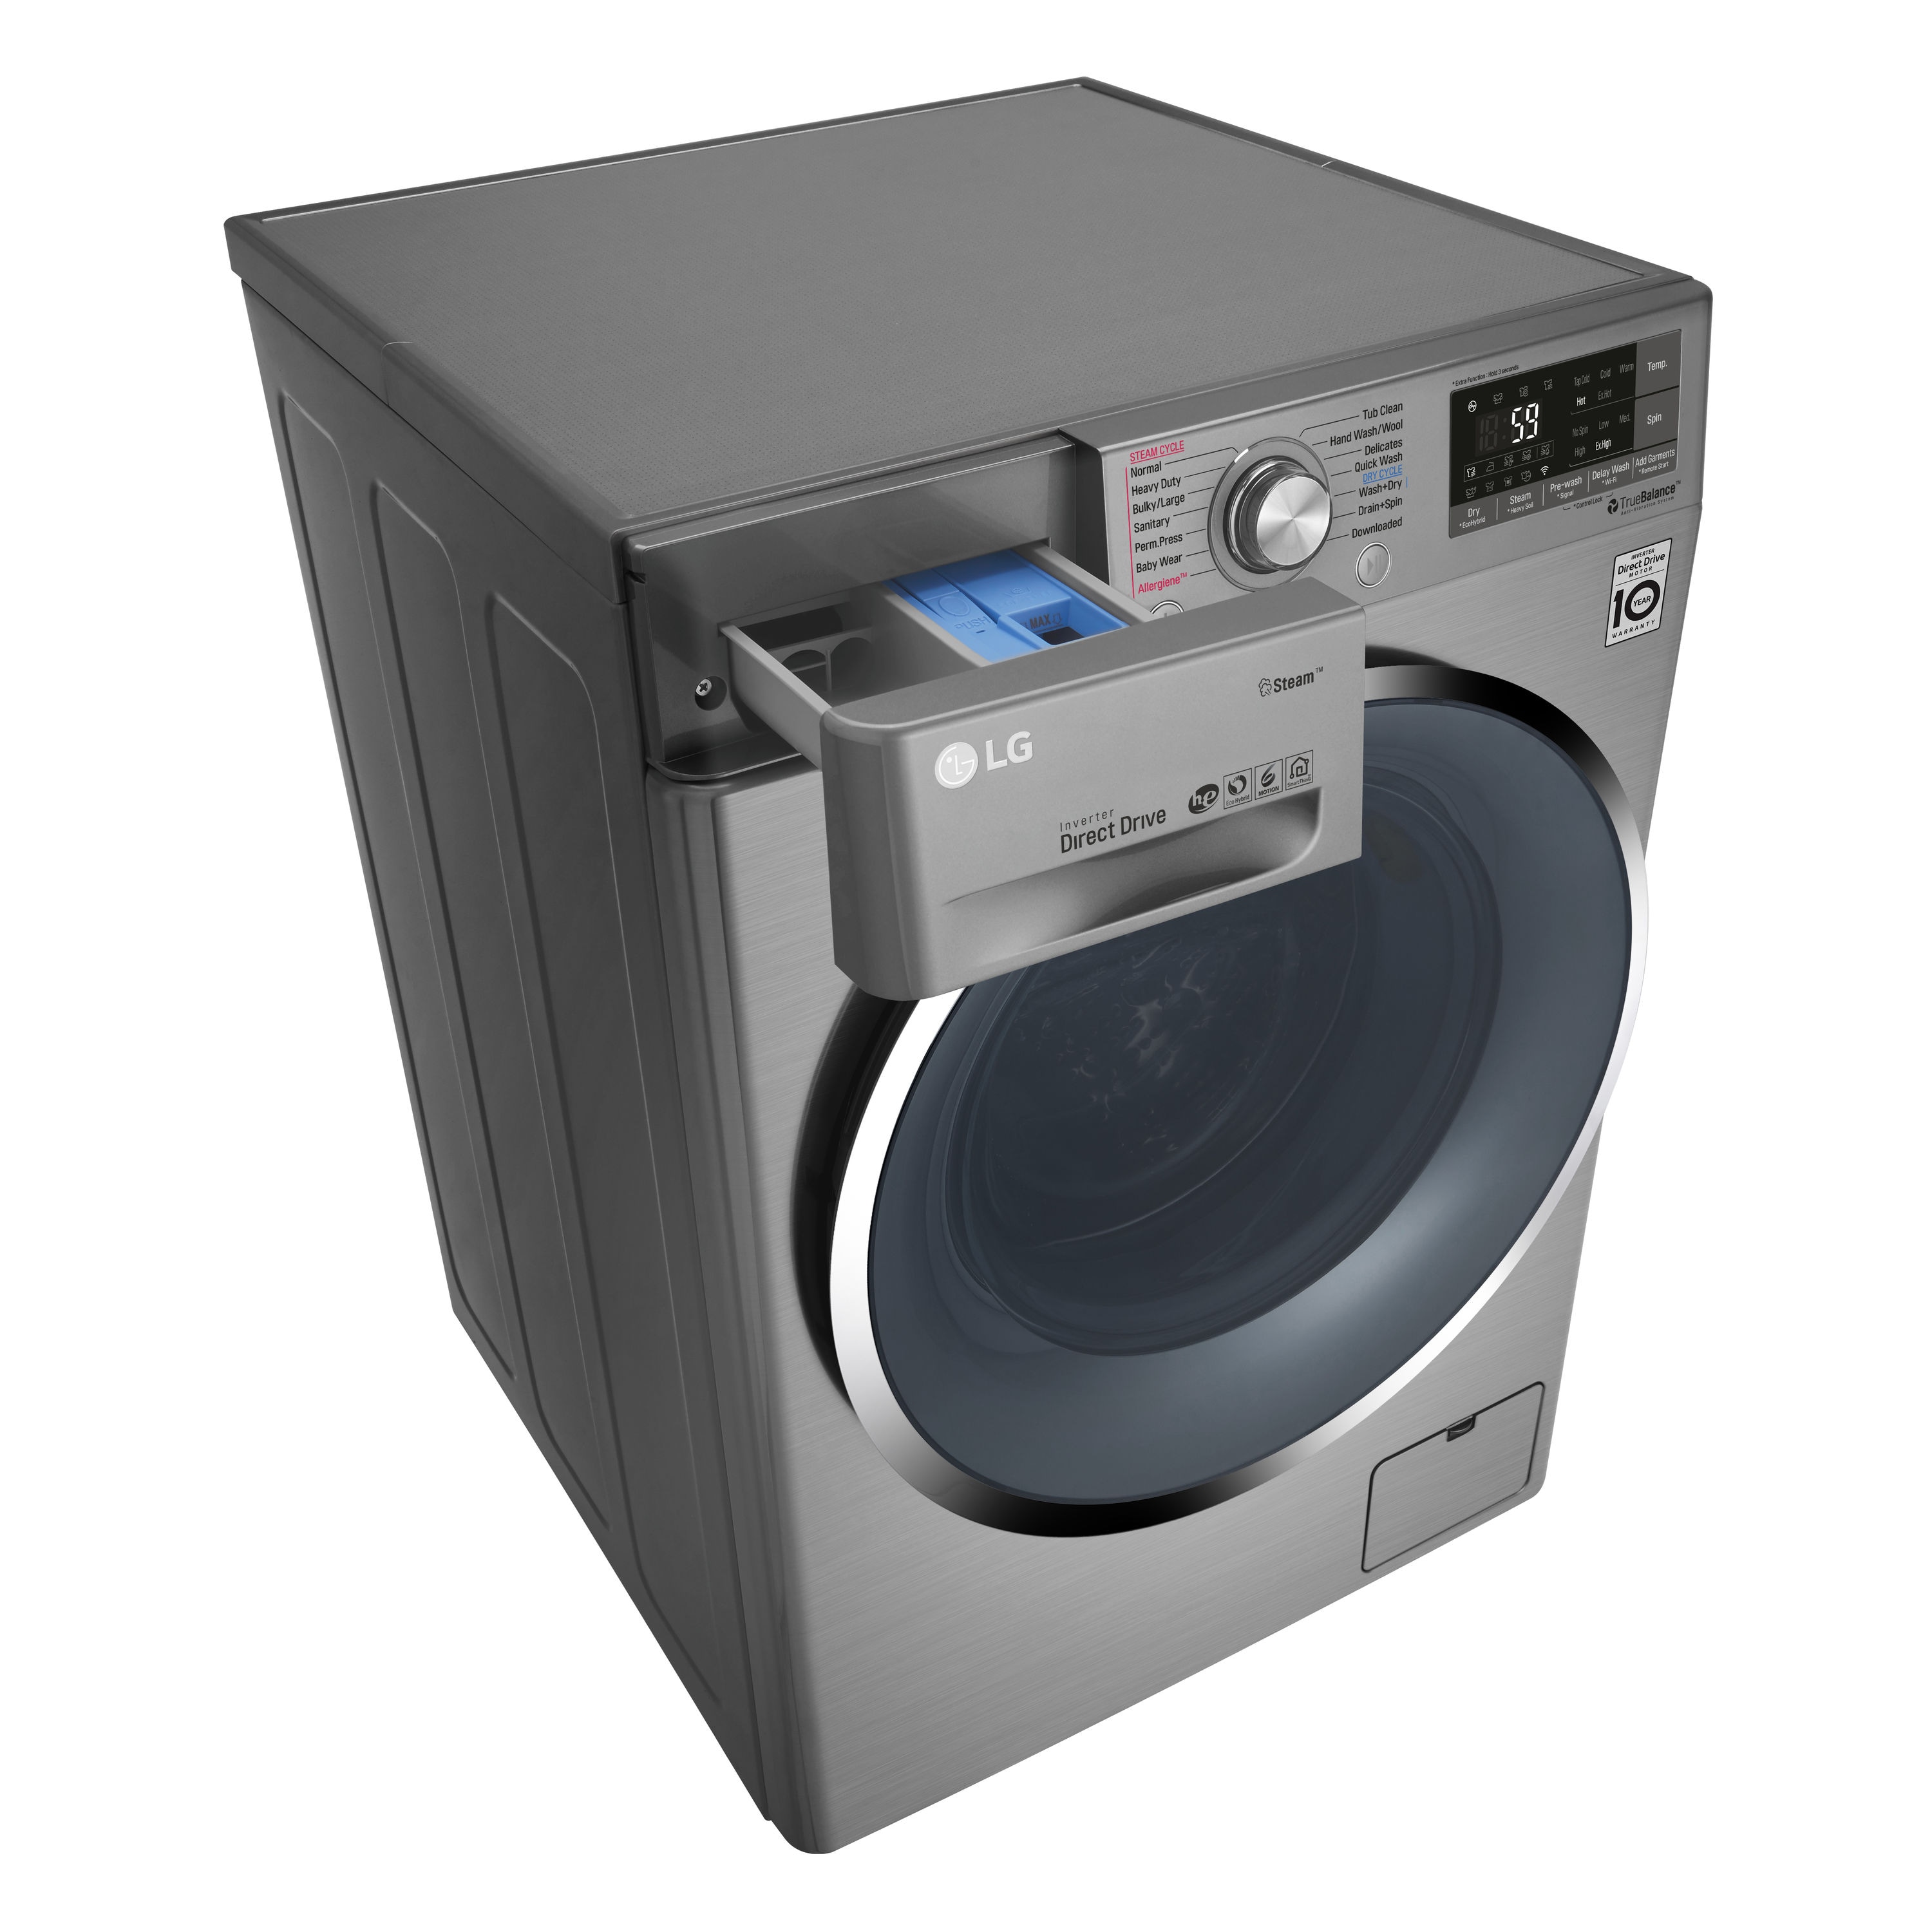 LG Enabled 2.3-cu ft Capacity Graphite Steel Ventless All-in-One Washer Dryer at Lowes.com